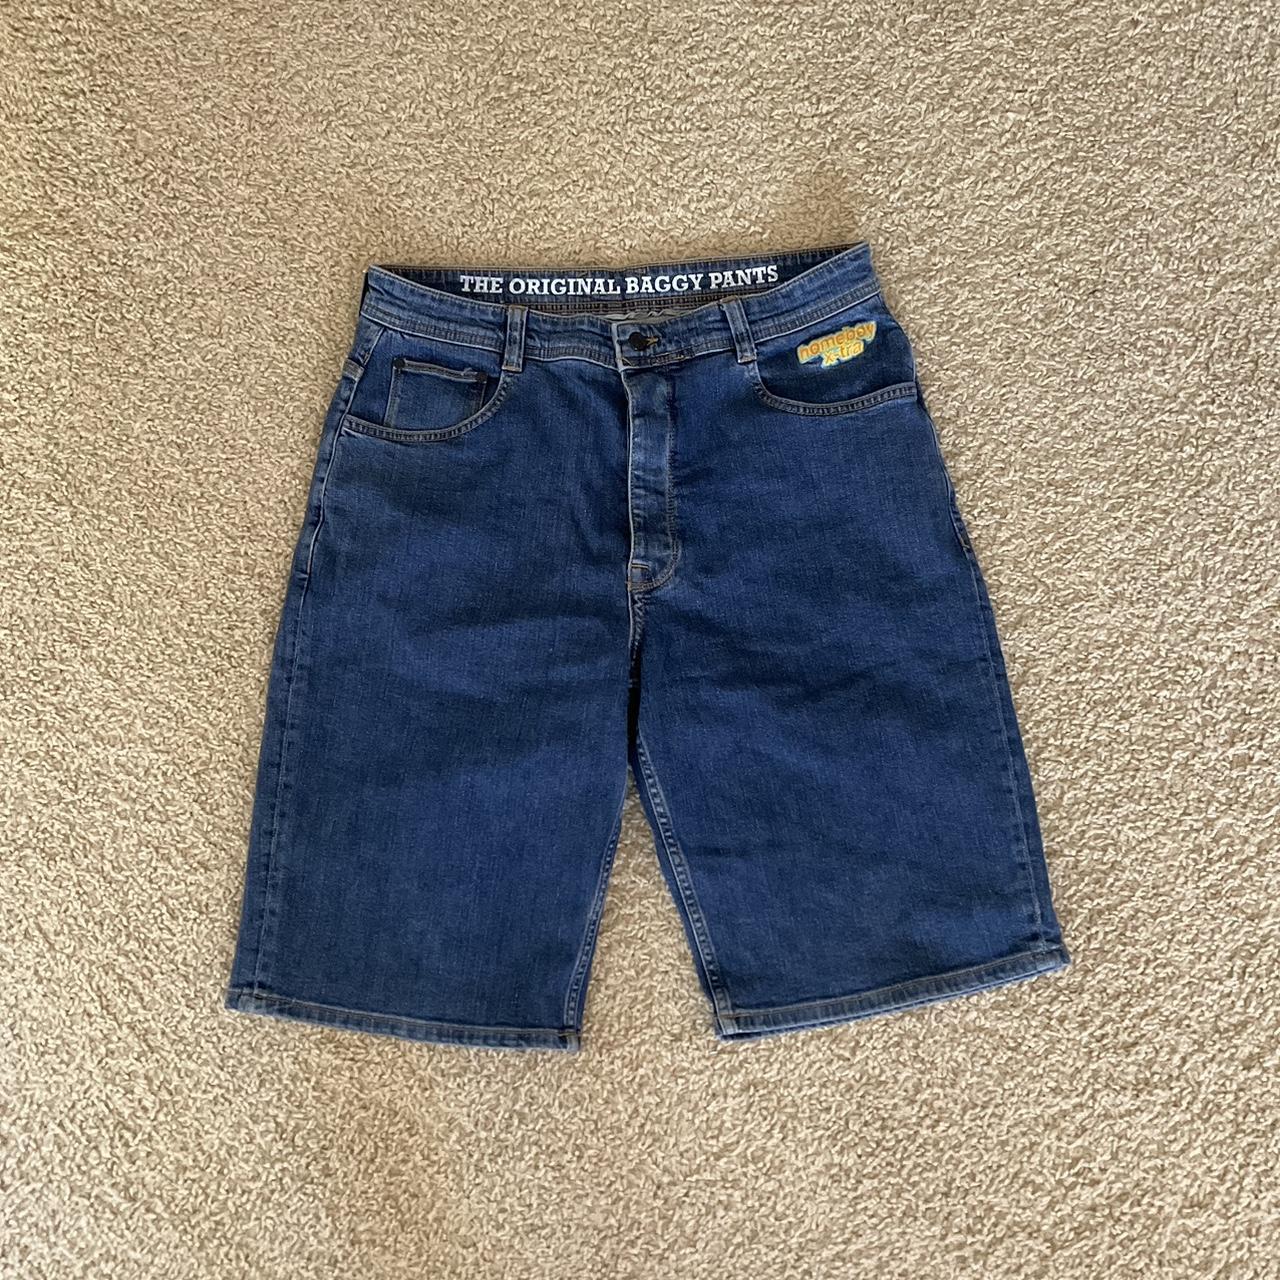 Homeboy xtra jorts Excellent condition no flaws or... - Depop